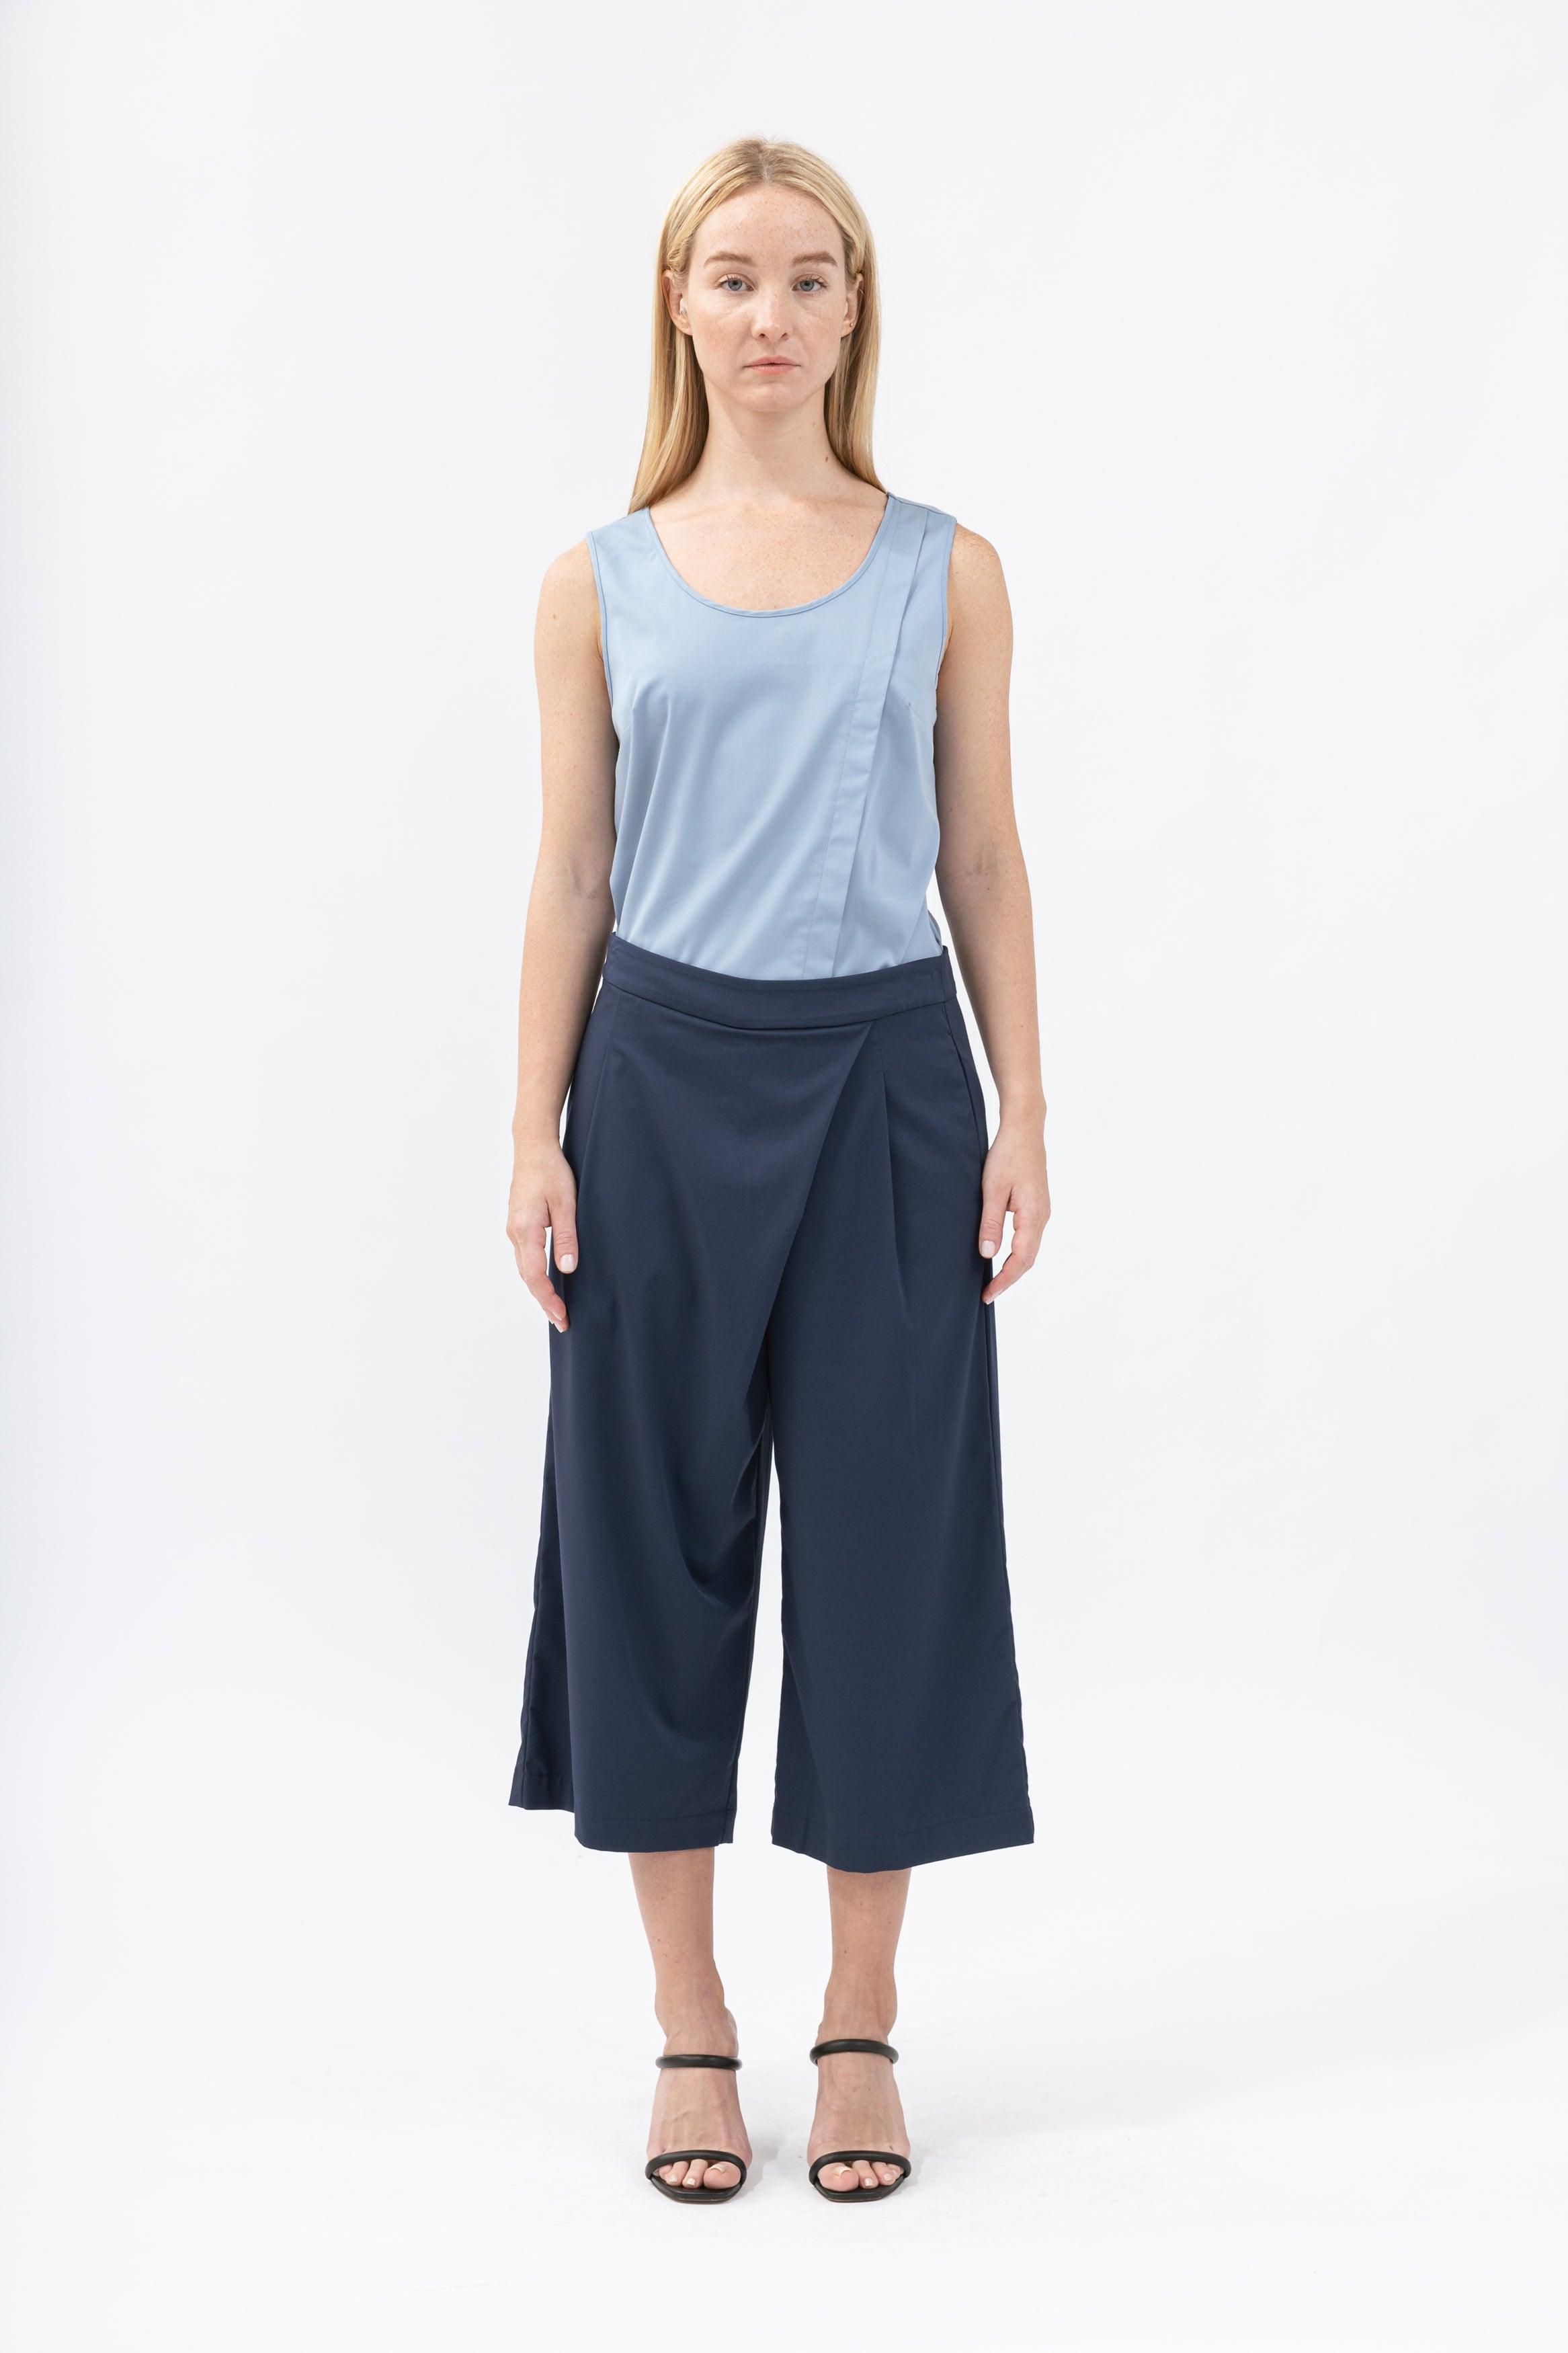 Women's Pleated Wide Cropped Pants - NOT LABELED